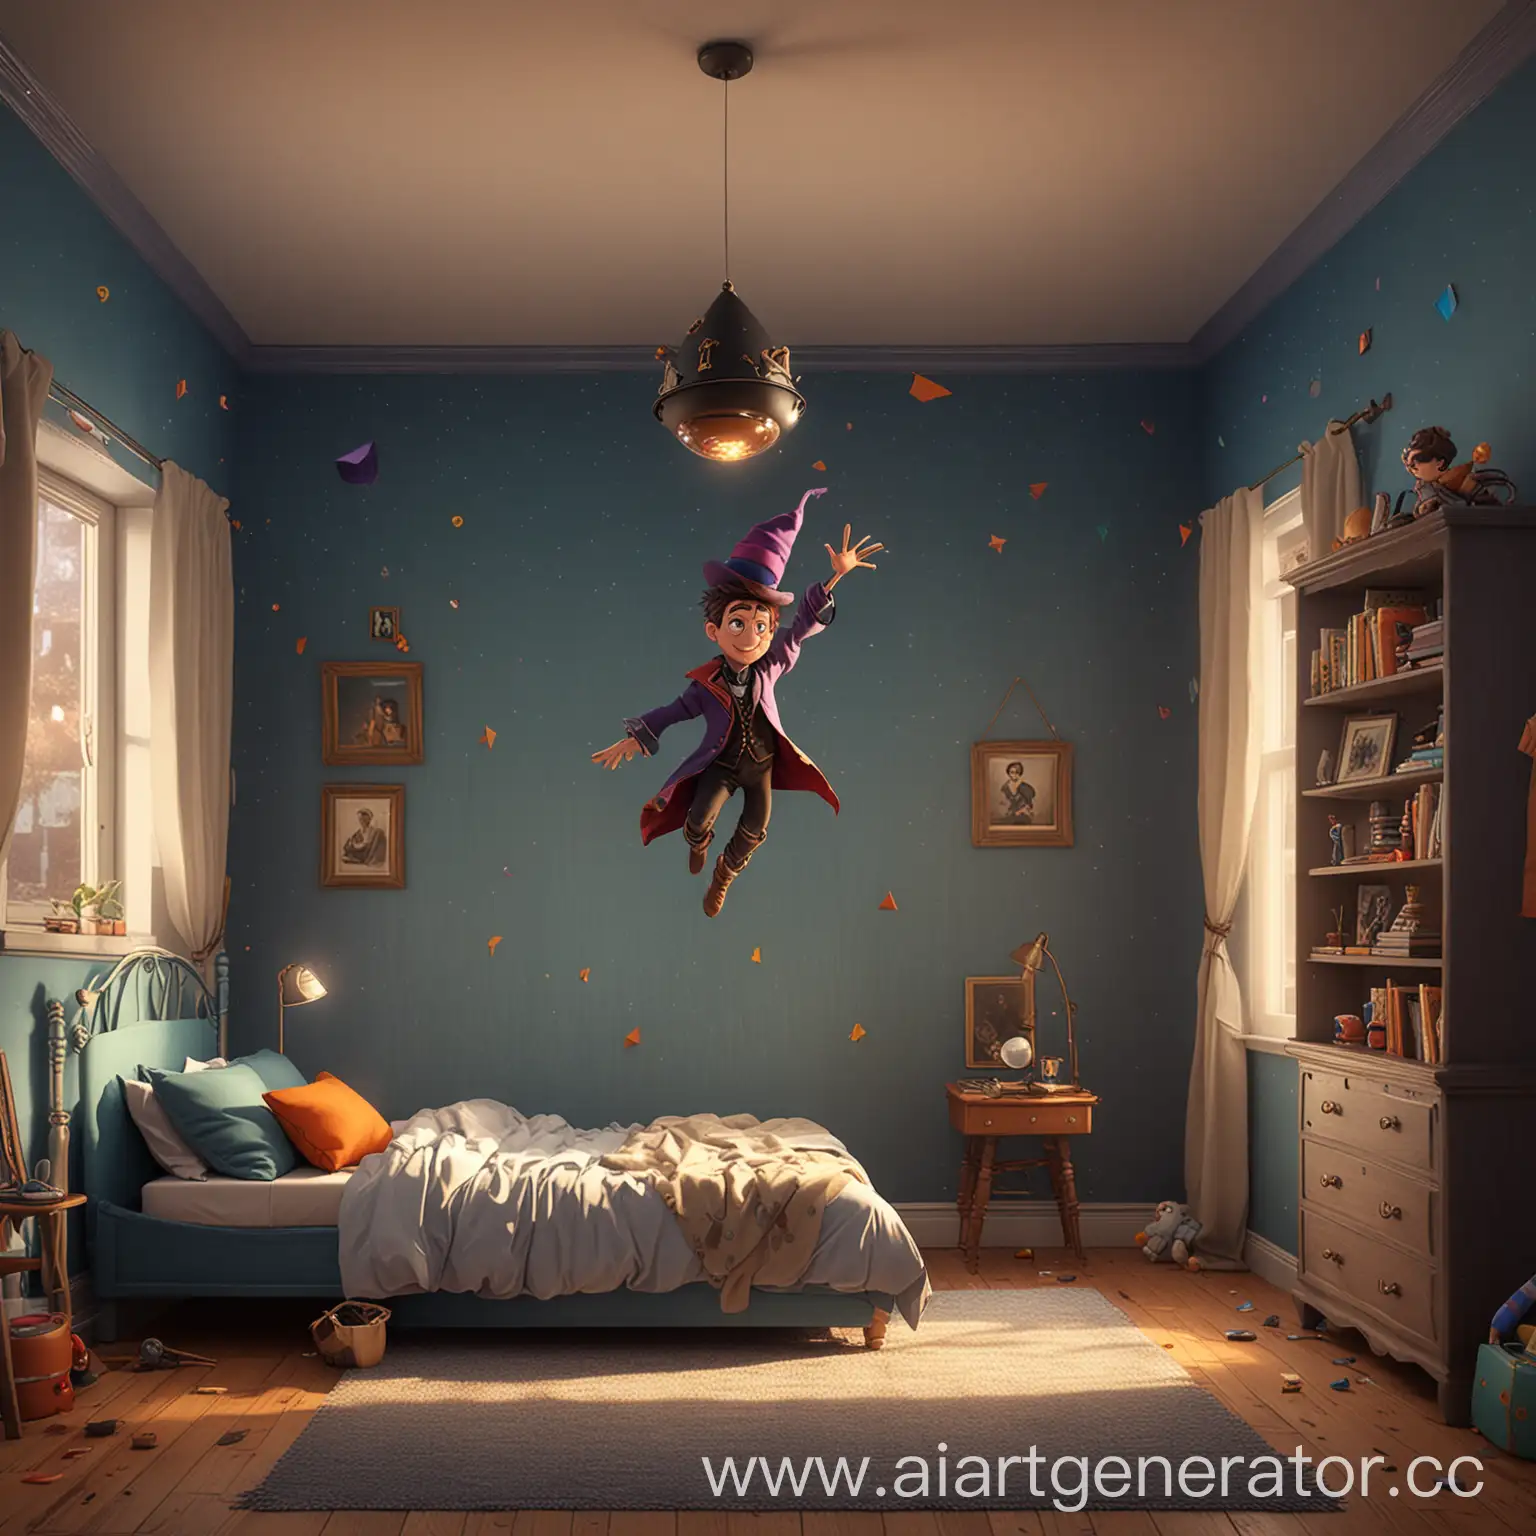 Fantasy-Magician-in-Pixar-Style-Floating-in-HyperRealistic-Childs-Room